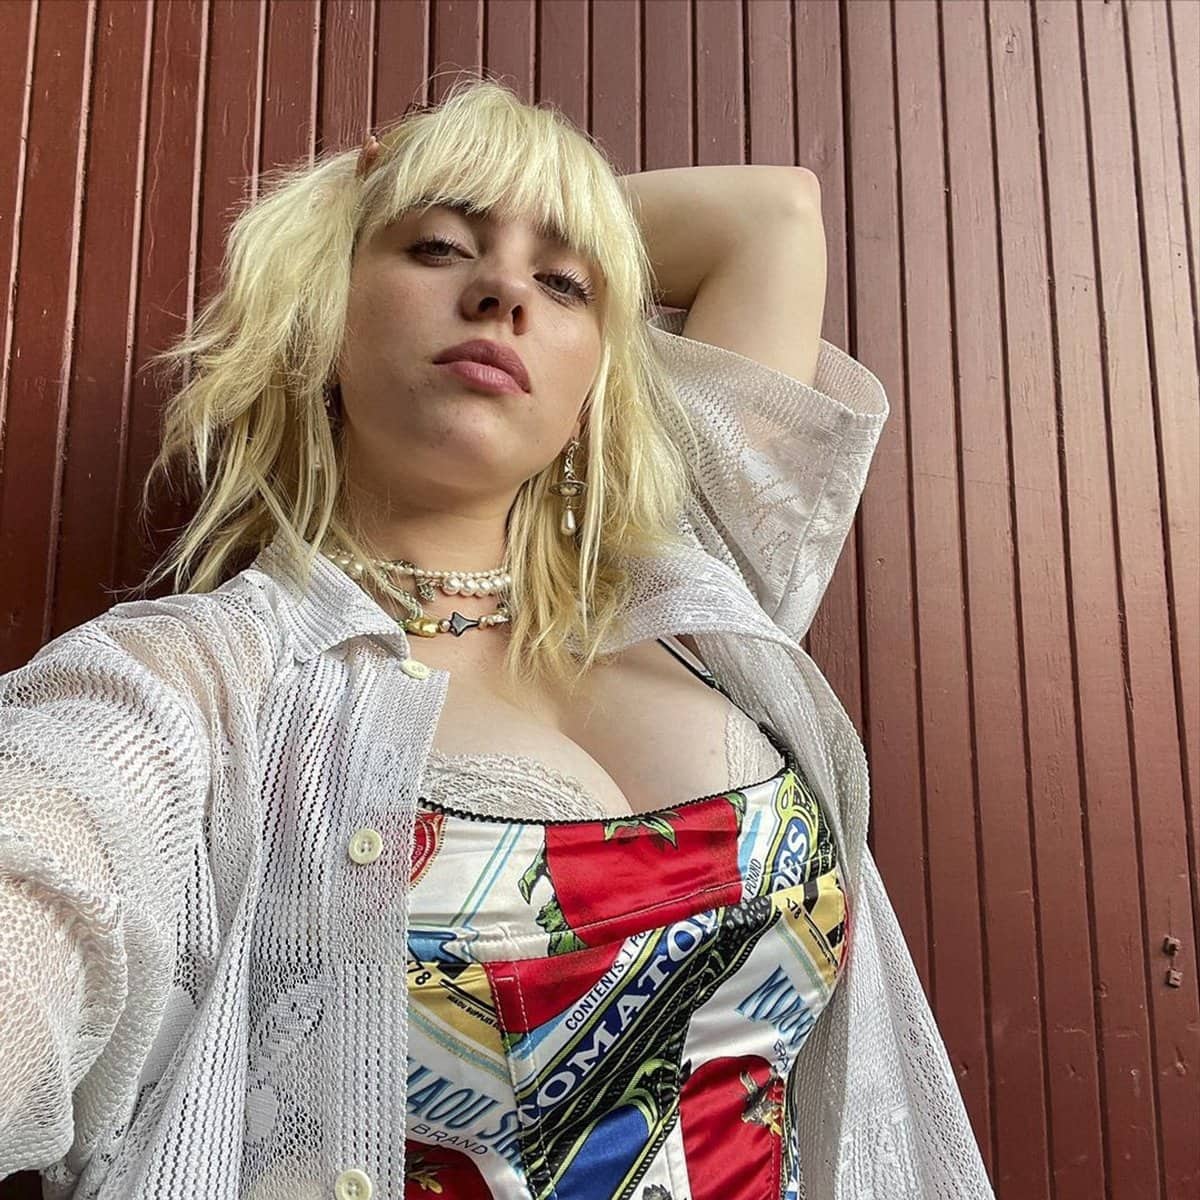 Billie Eilish flaunts her boobs in a graphic corset top from indie fashion label Miaou